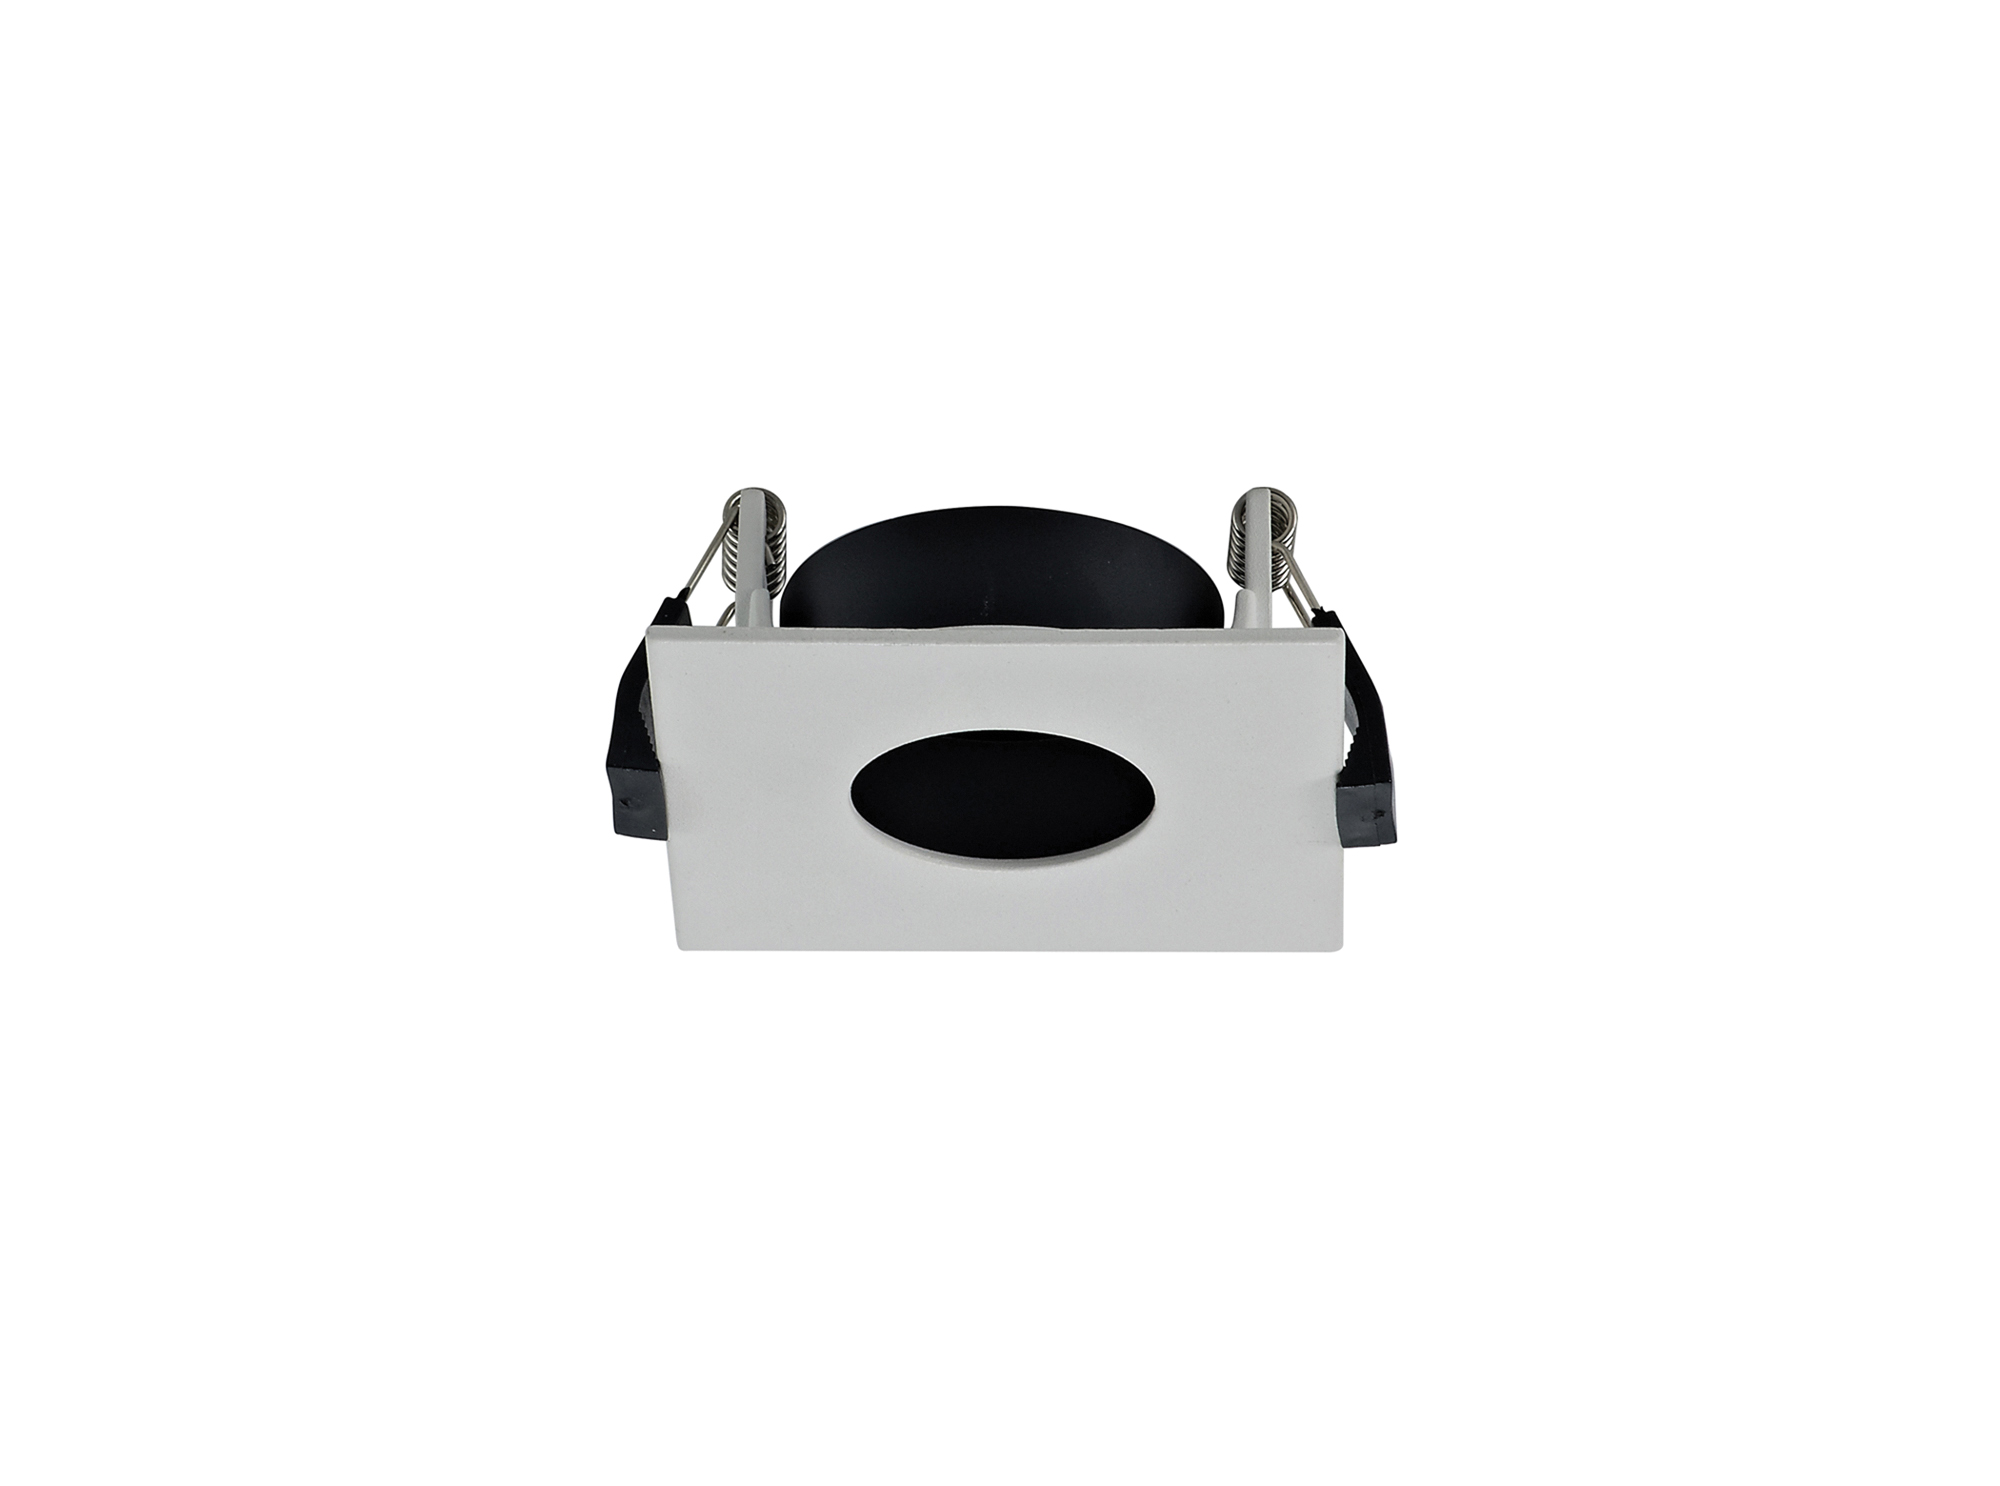 DX200366  Blate; White Recessed Square Plate with Round Pinhole Spotlight - LED ENGINE REQUIRED; 83x83mm; Cut Out: 76mm; 3yrs Warranty